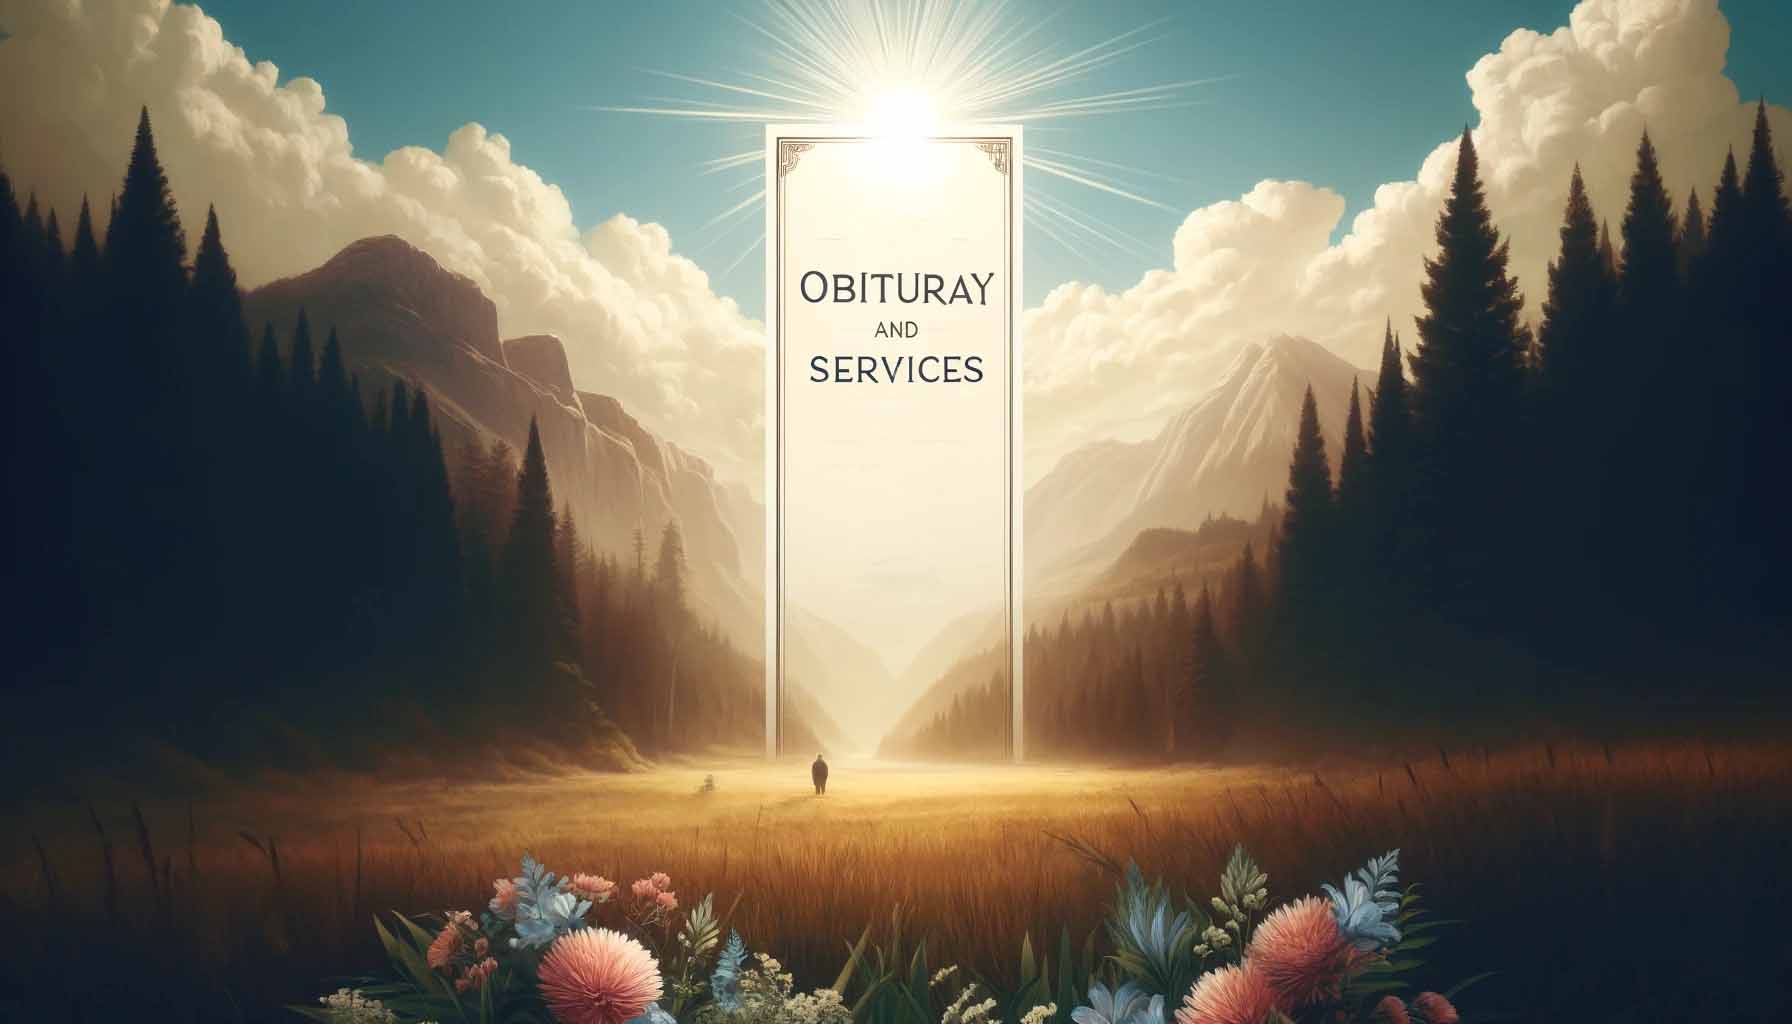 Obituary and Services for men news graphic